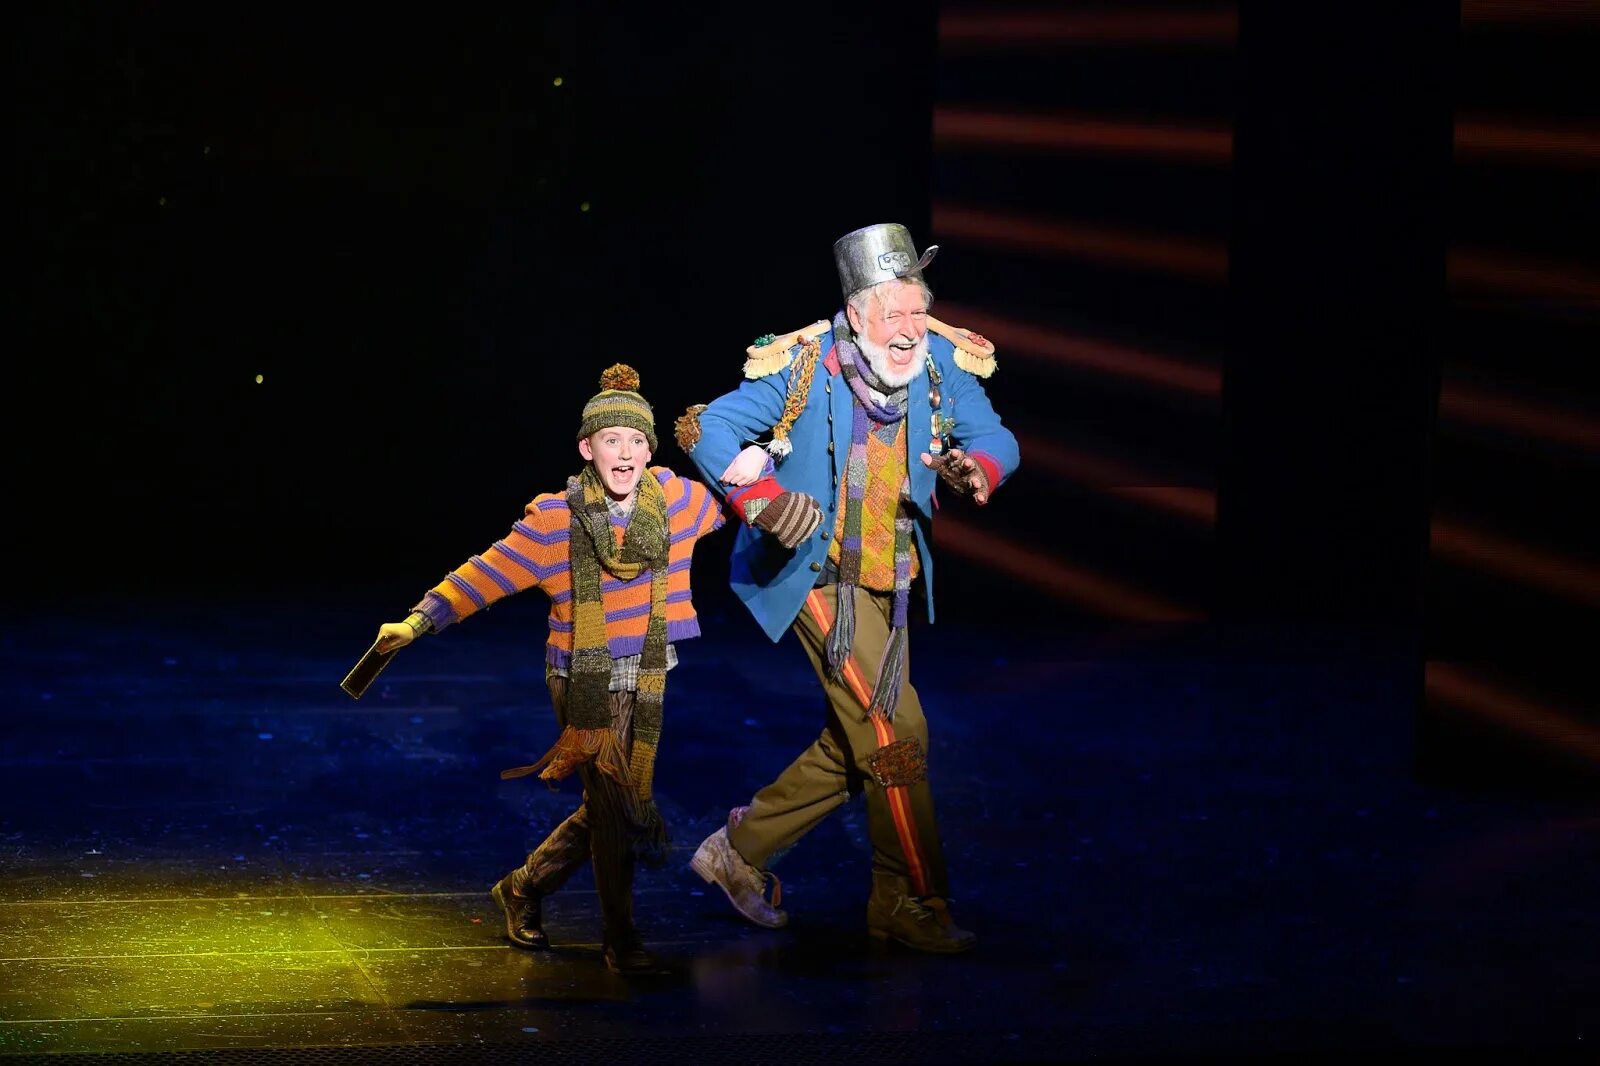 Charlie and the Chocolate Factory Musical. Charlie and the Chocolate Factory the New Musical. Charlie and Chocolate Factory Brazilian Musical. Charlie's punishment and the Chocolate Factory. Мюзикл шоколад